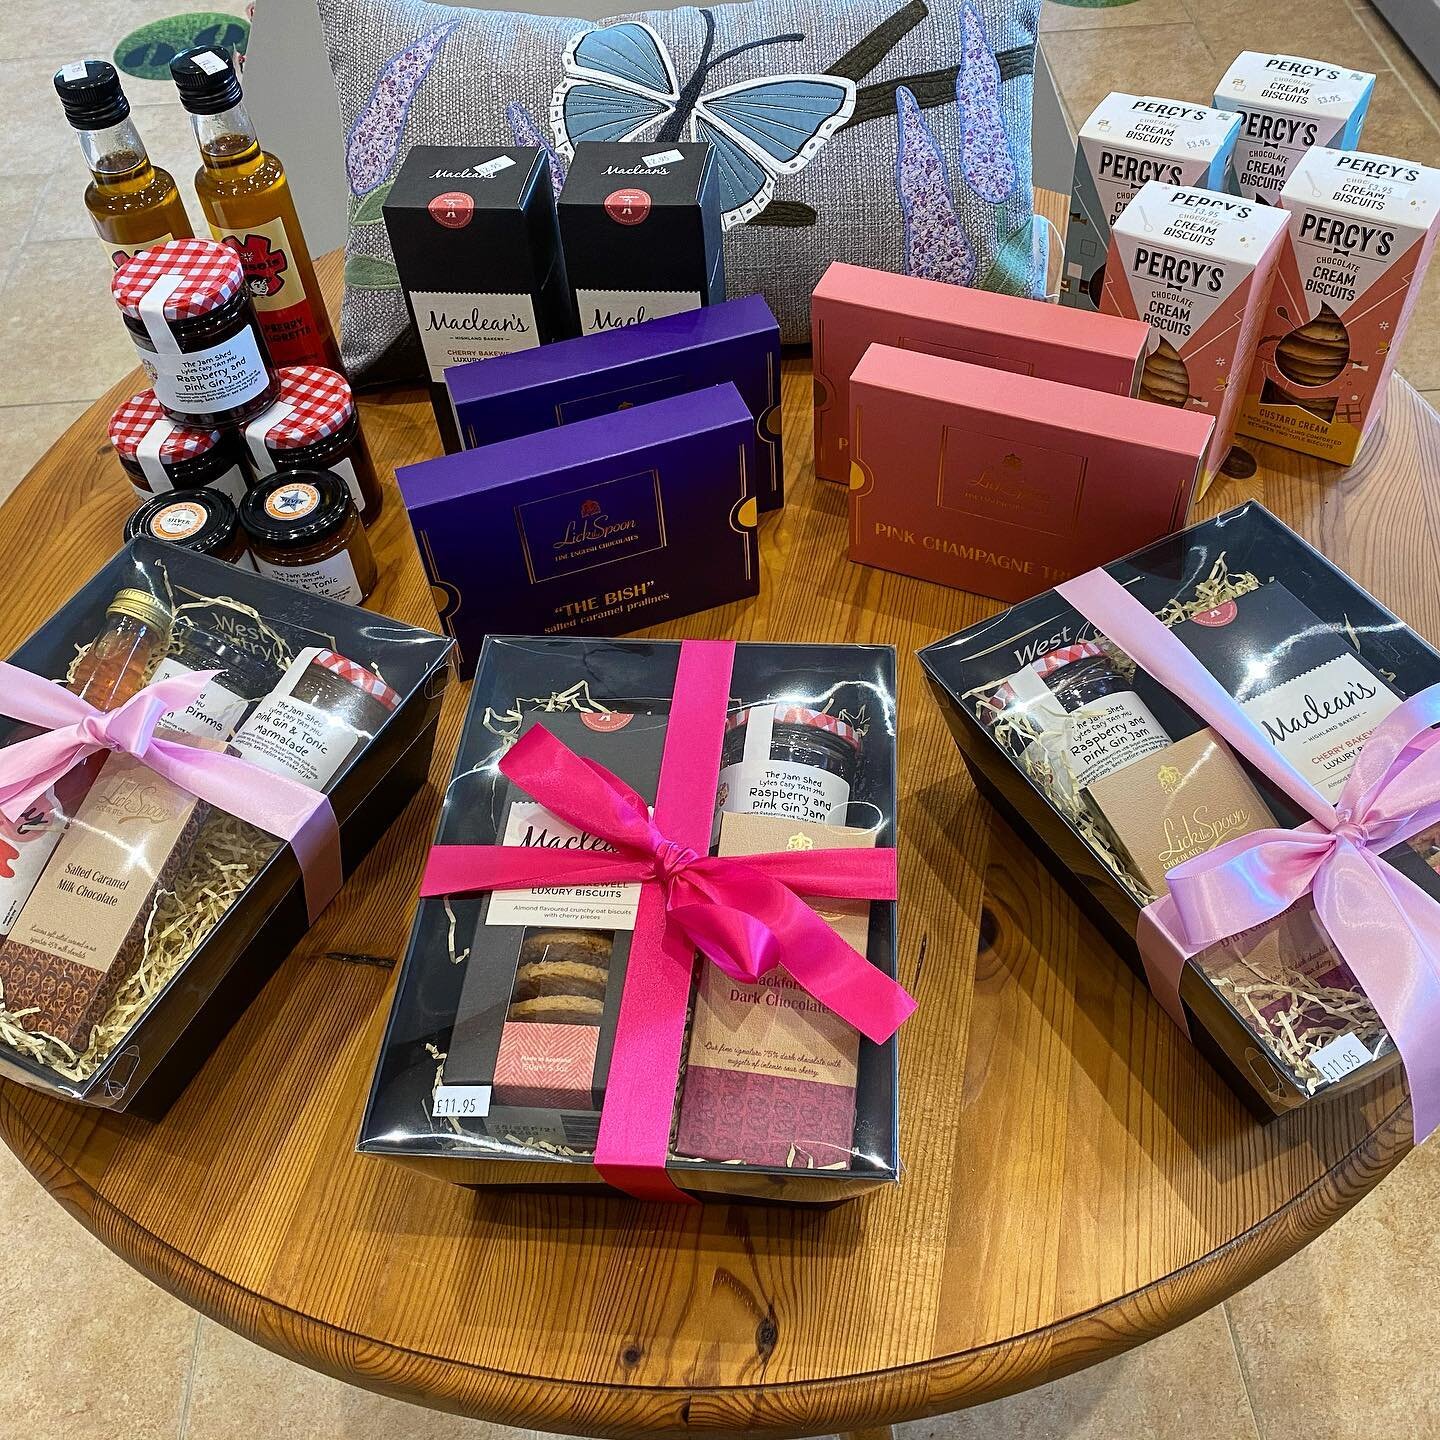 *MOTHER&rsquo;S DAY*
We have some fantastic little gift boxes, perfect for Mother&rsquo;s Day! Also some delightful Lick the Spoon chocolates, all available from the farm shop. #mothersday #somerset #gifts #localbusiness #localproduce #chocolate #ham